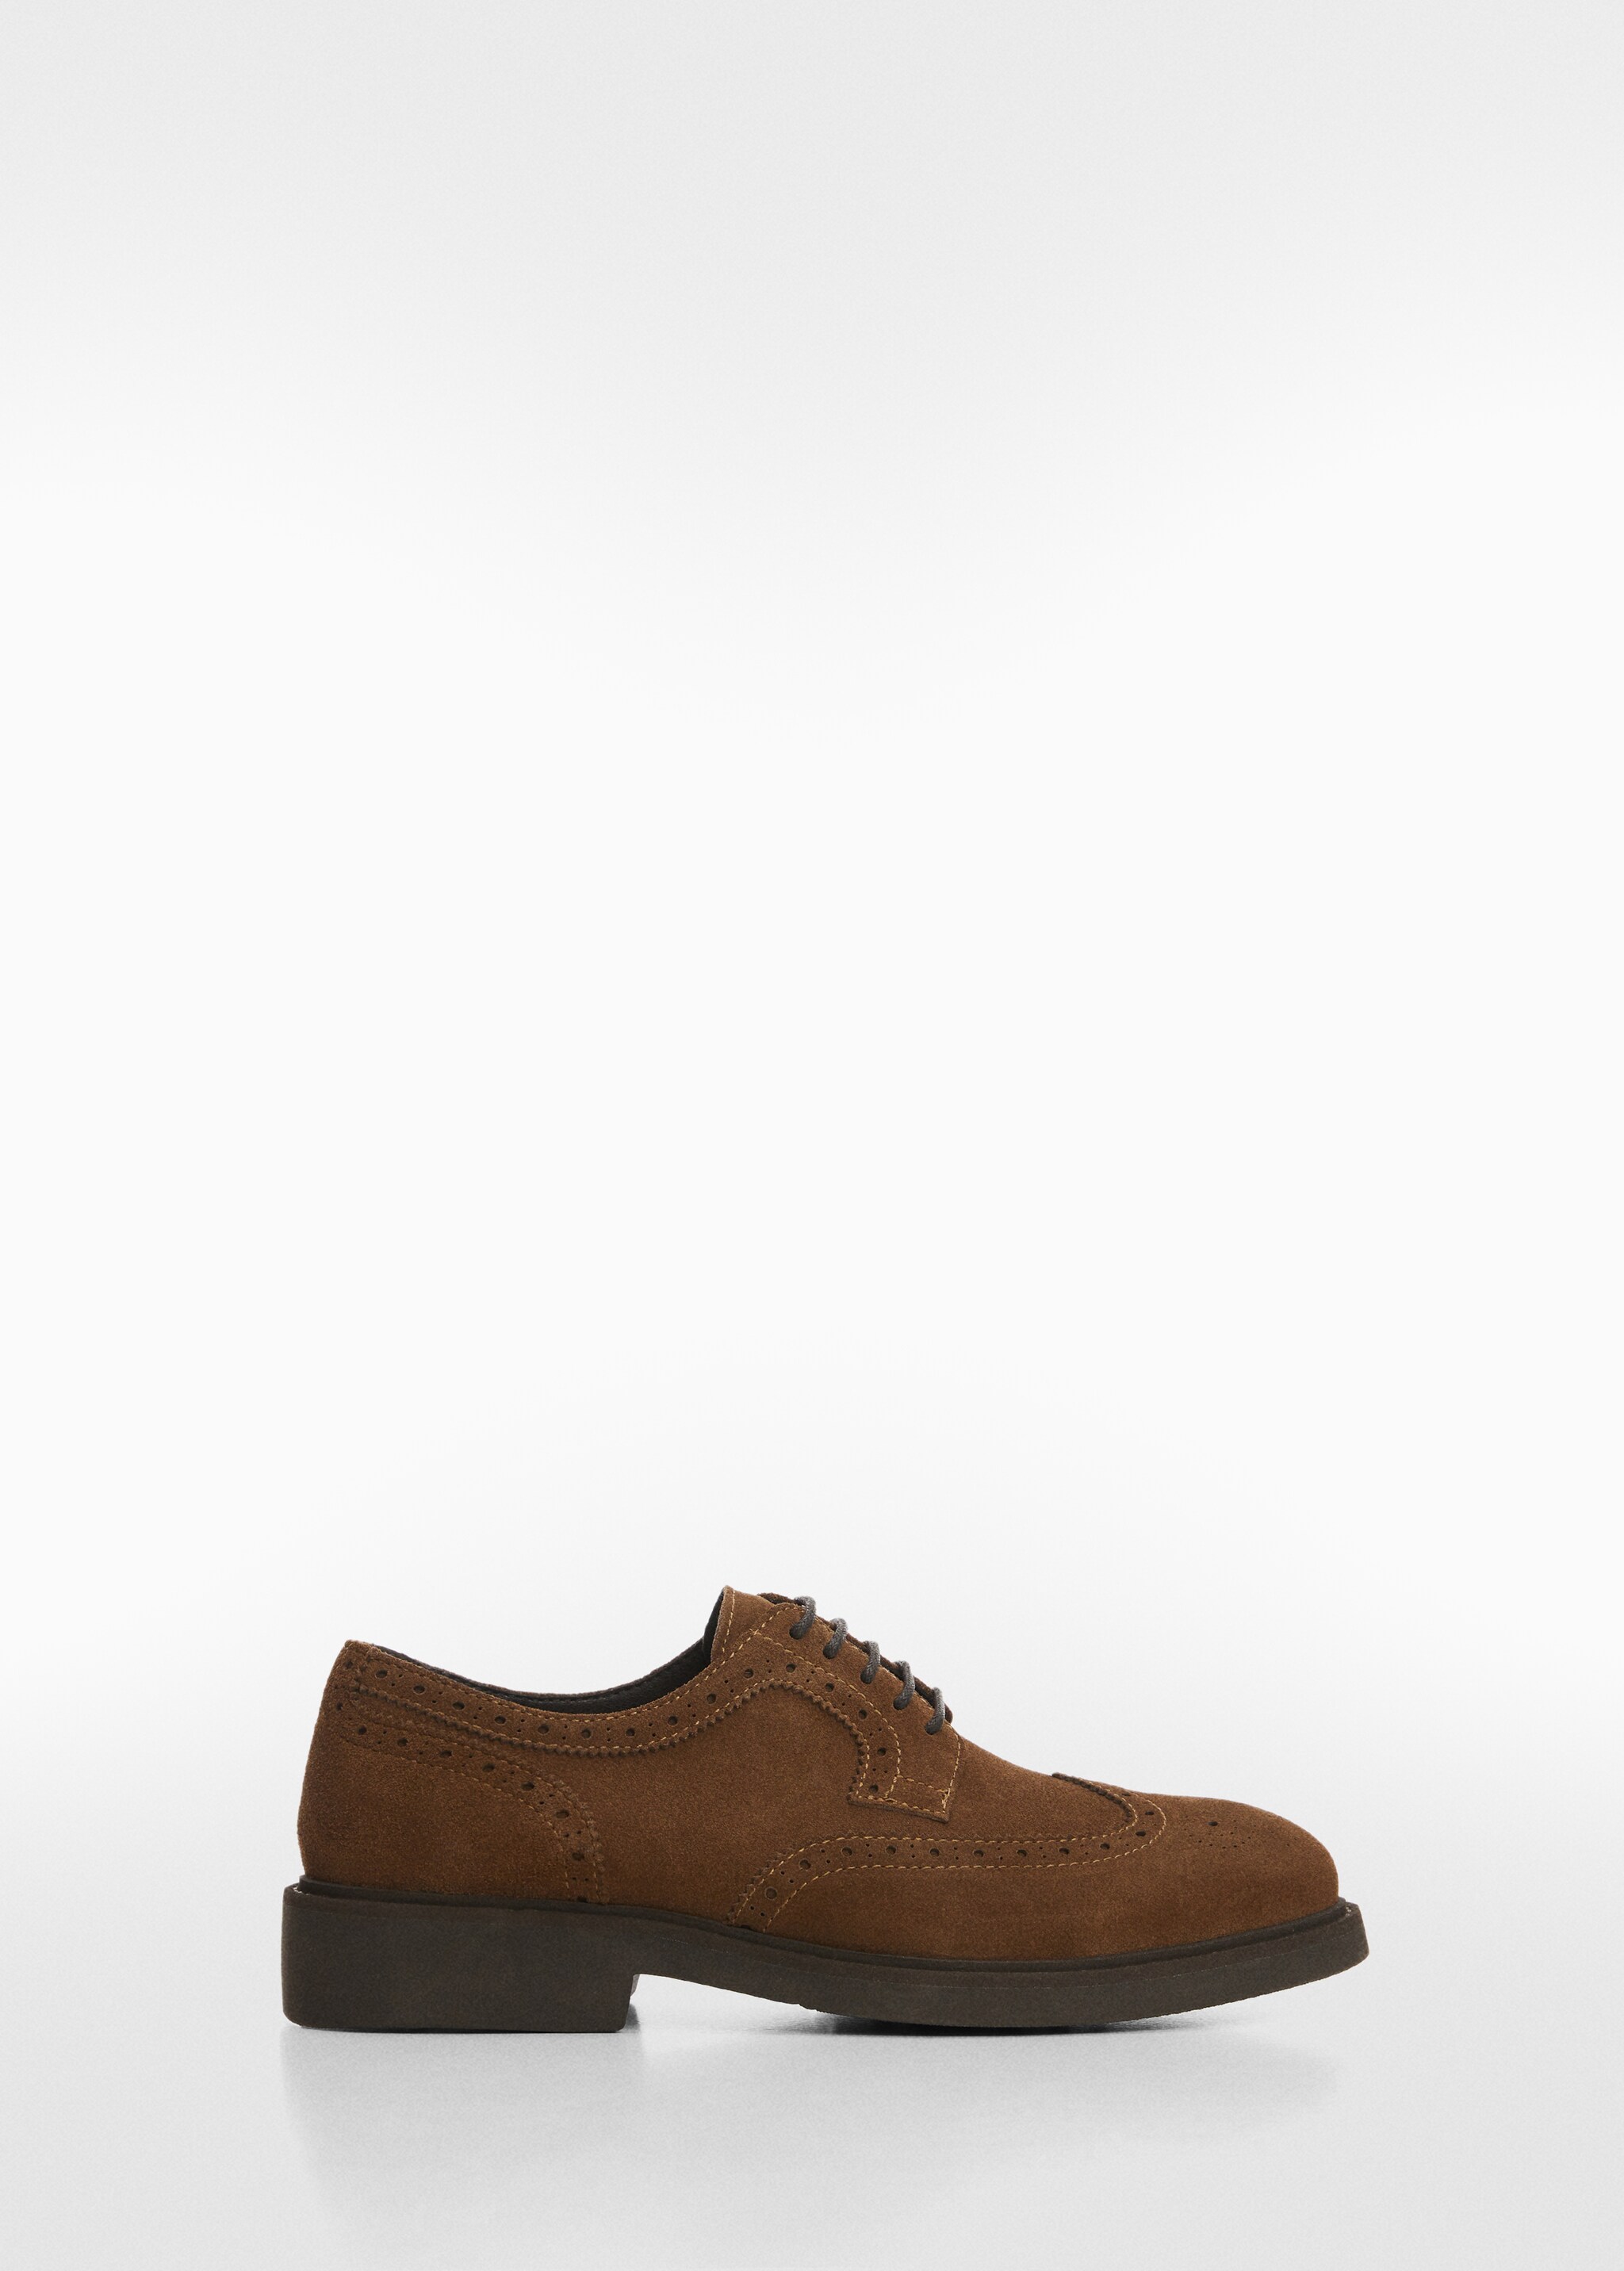 Die-cut suede blucher shoes - Article without model